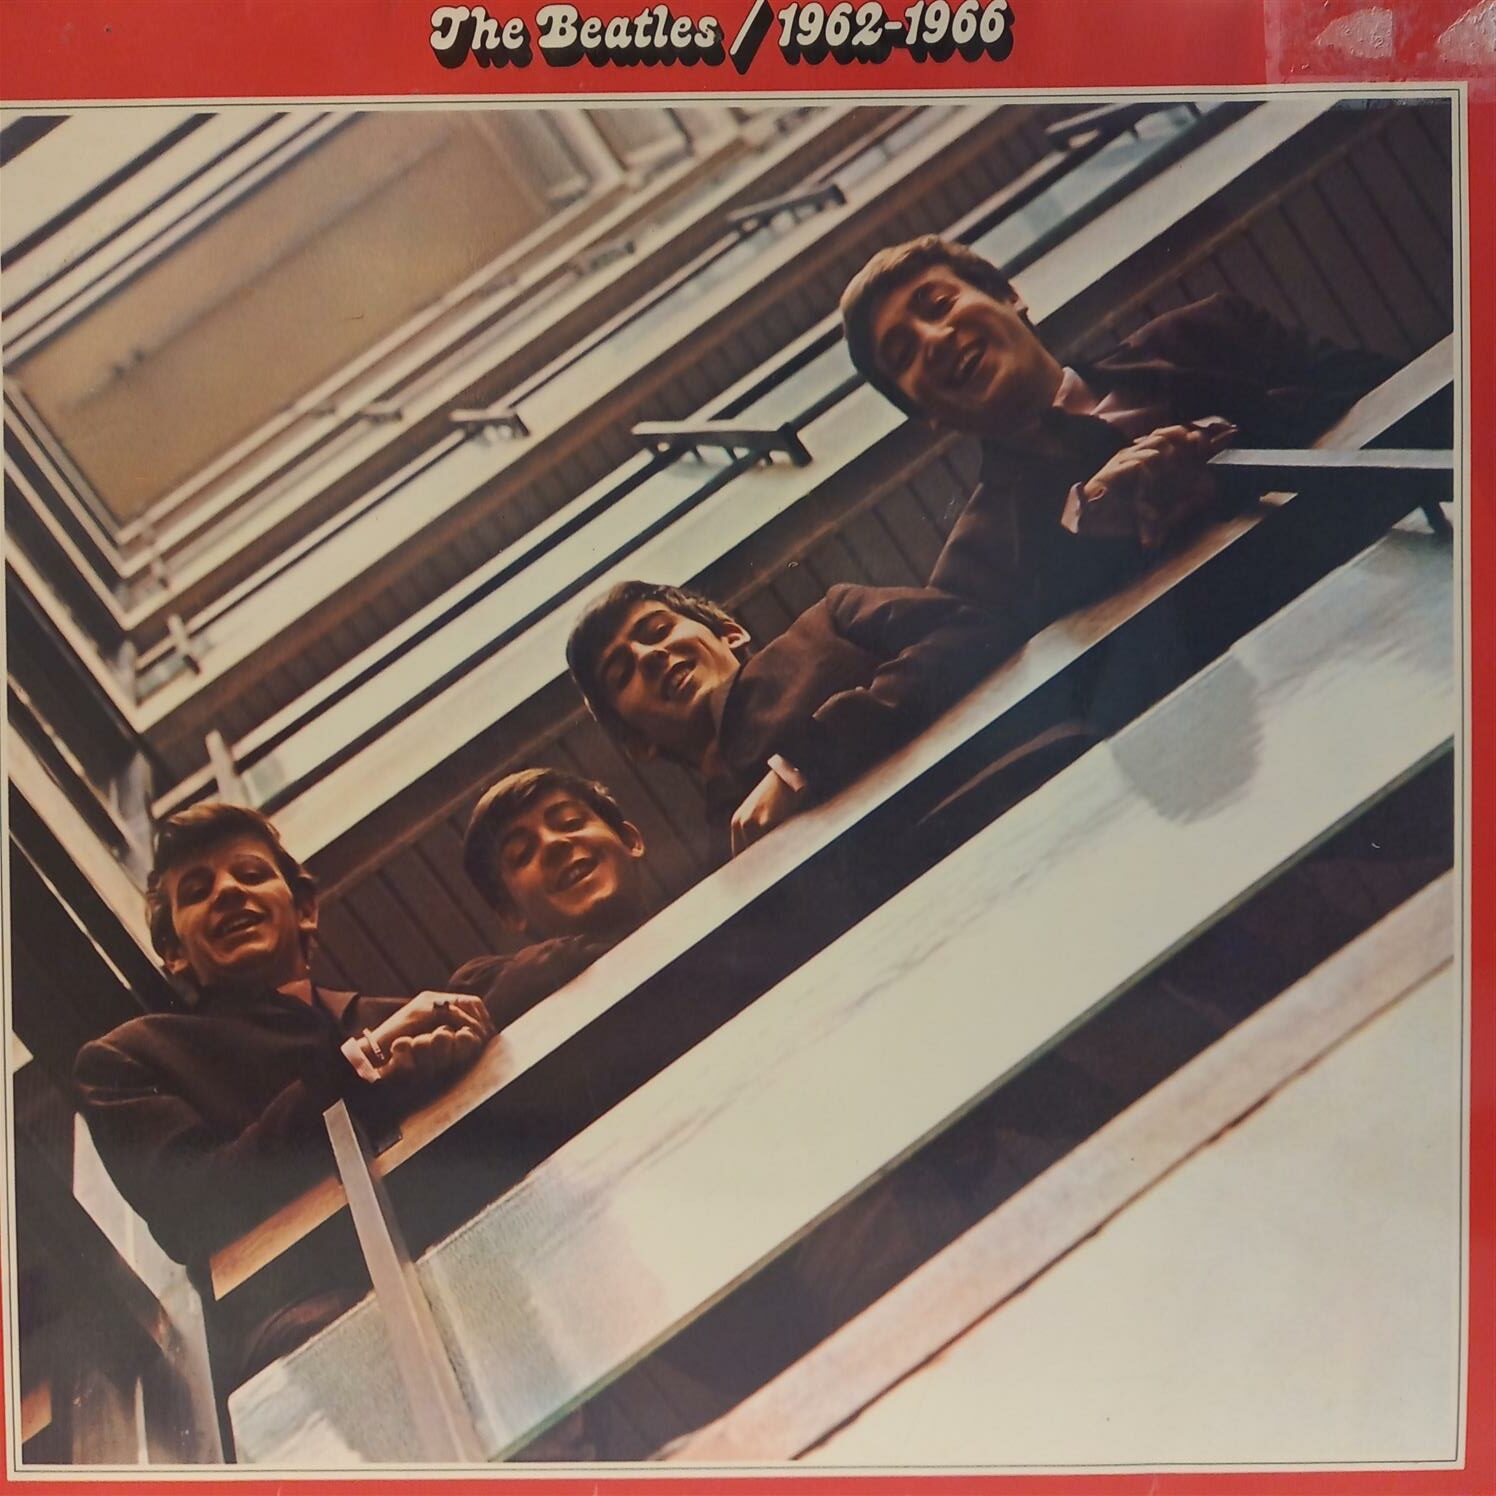 THE BEATLES – 1962-1966 (RED ALBUM) ON